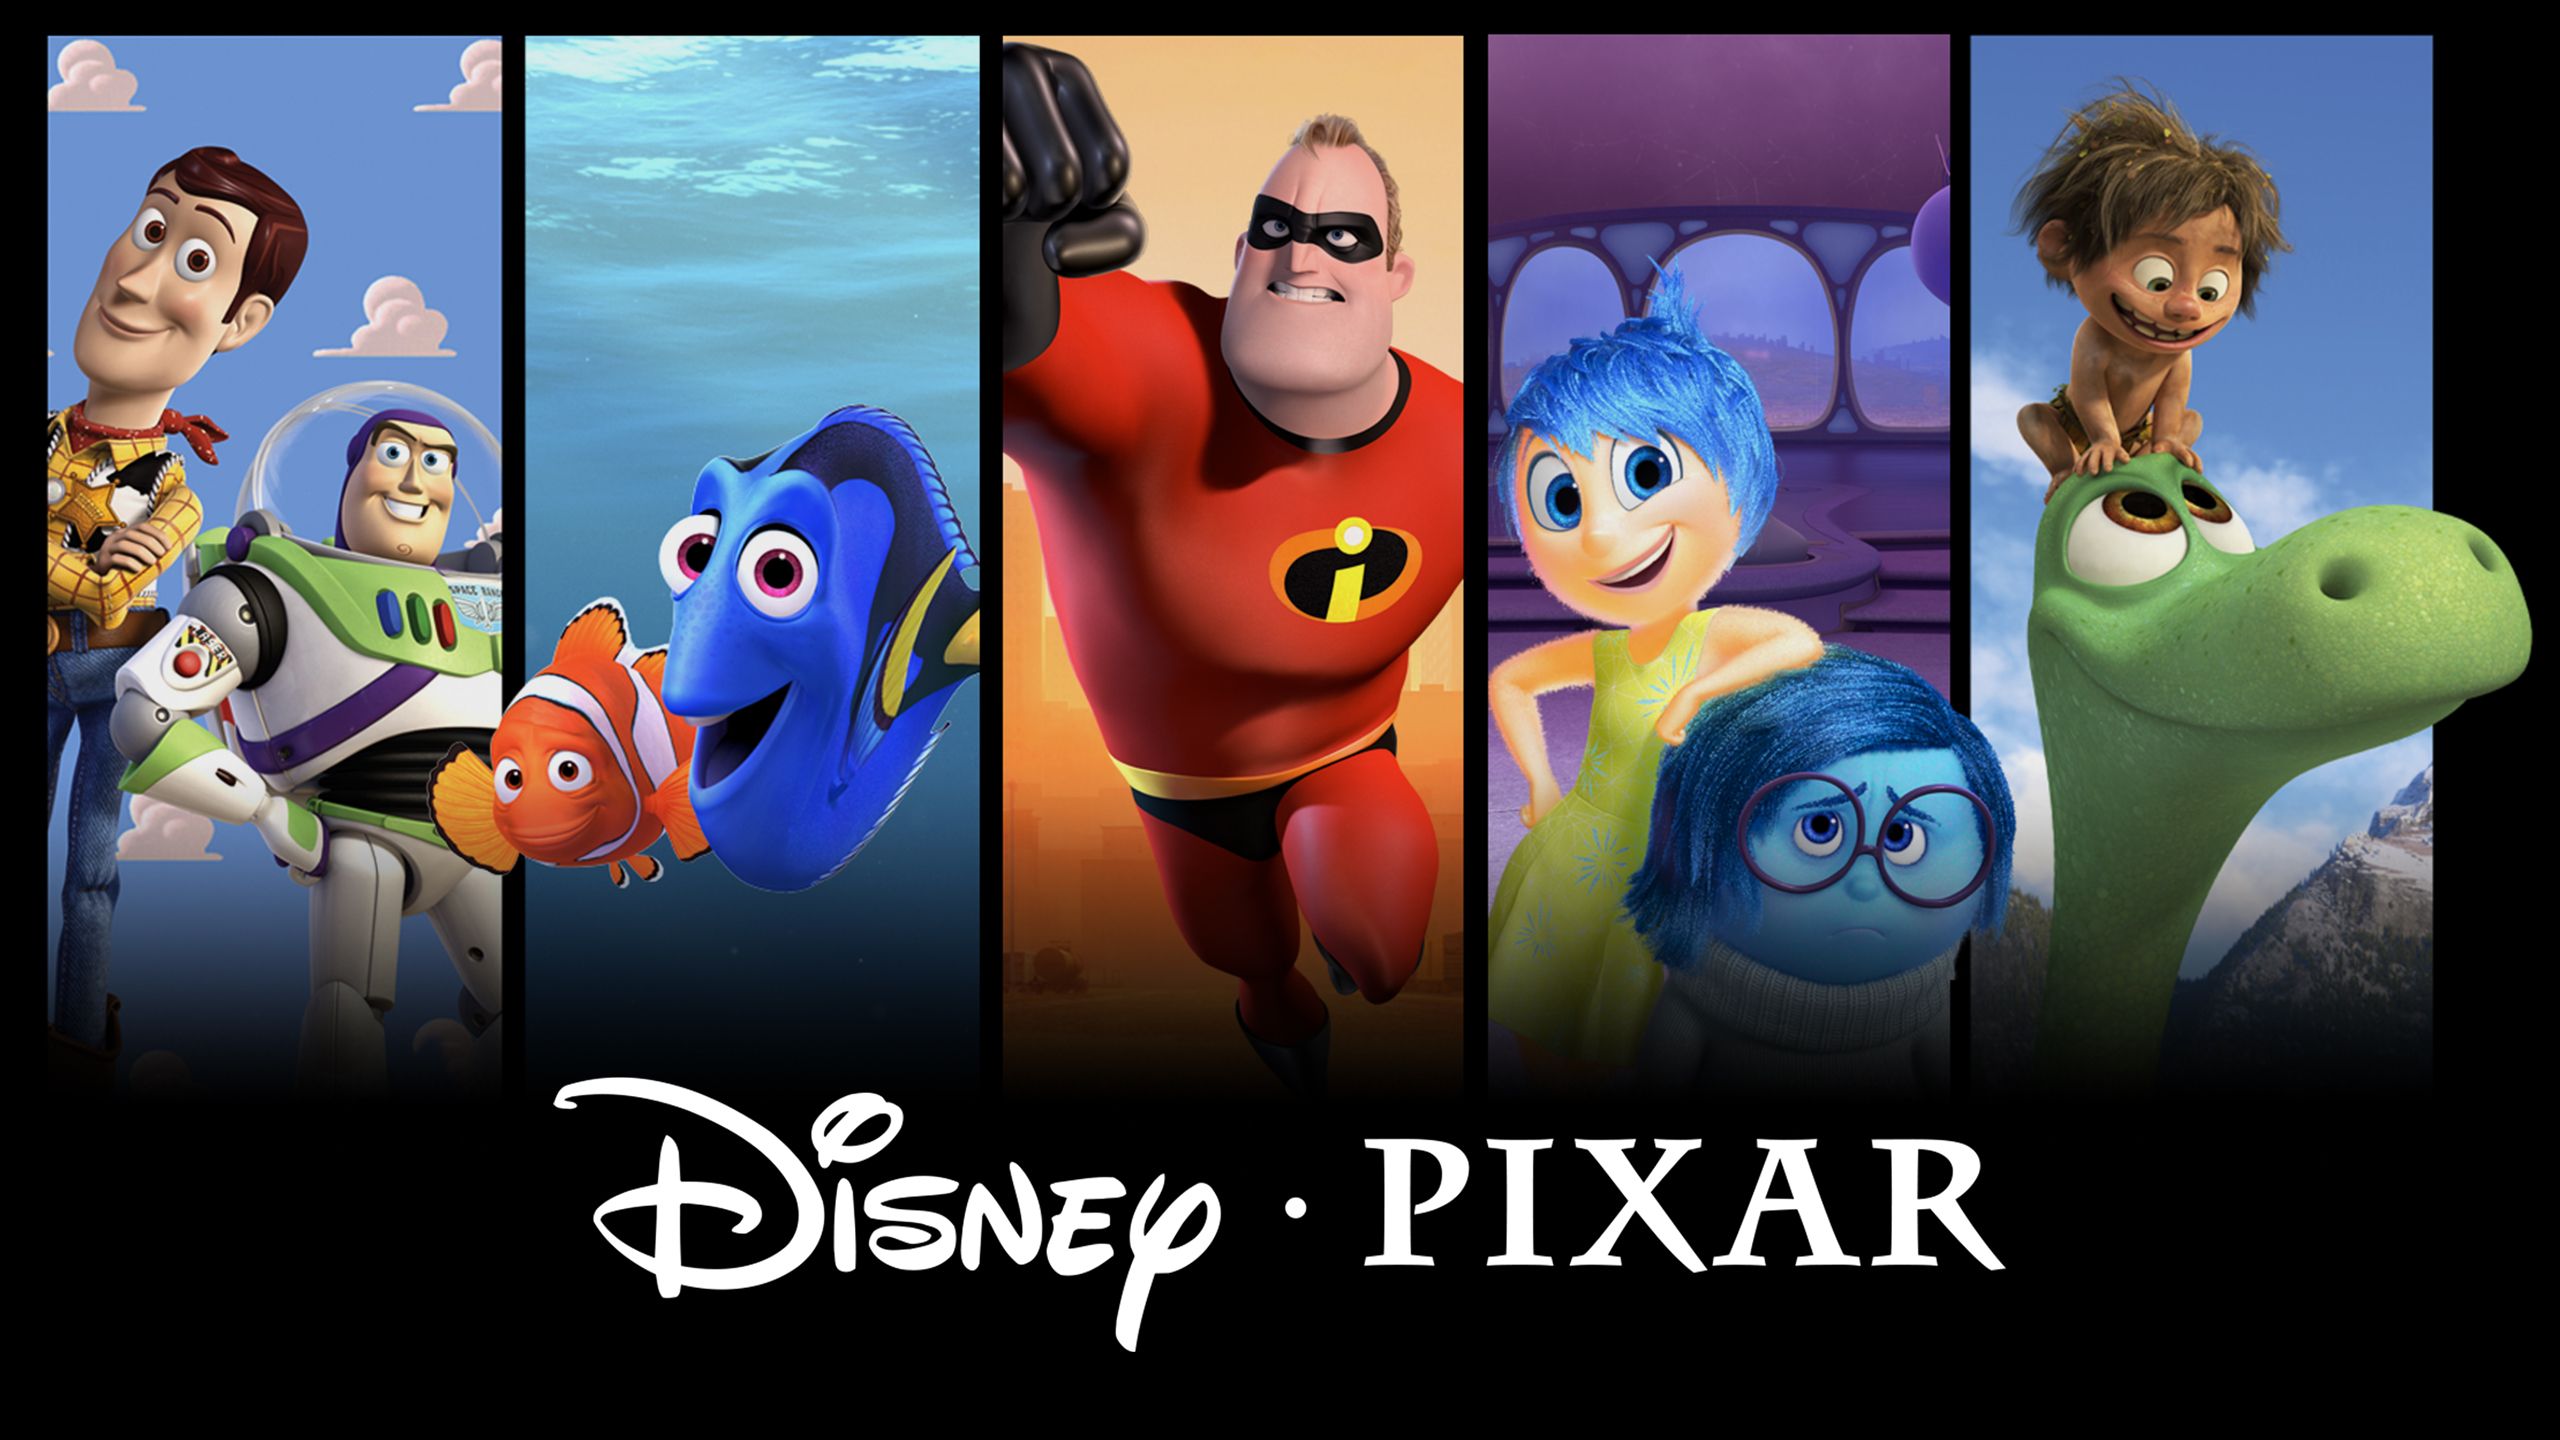 Disney Pixar Collection on Movies Anywhere